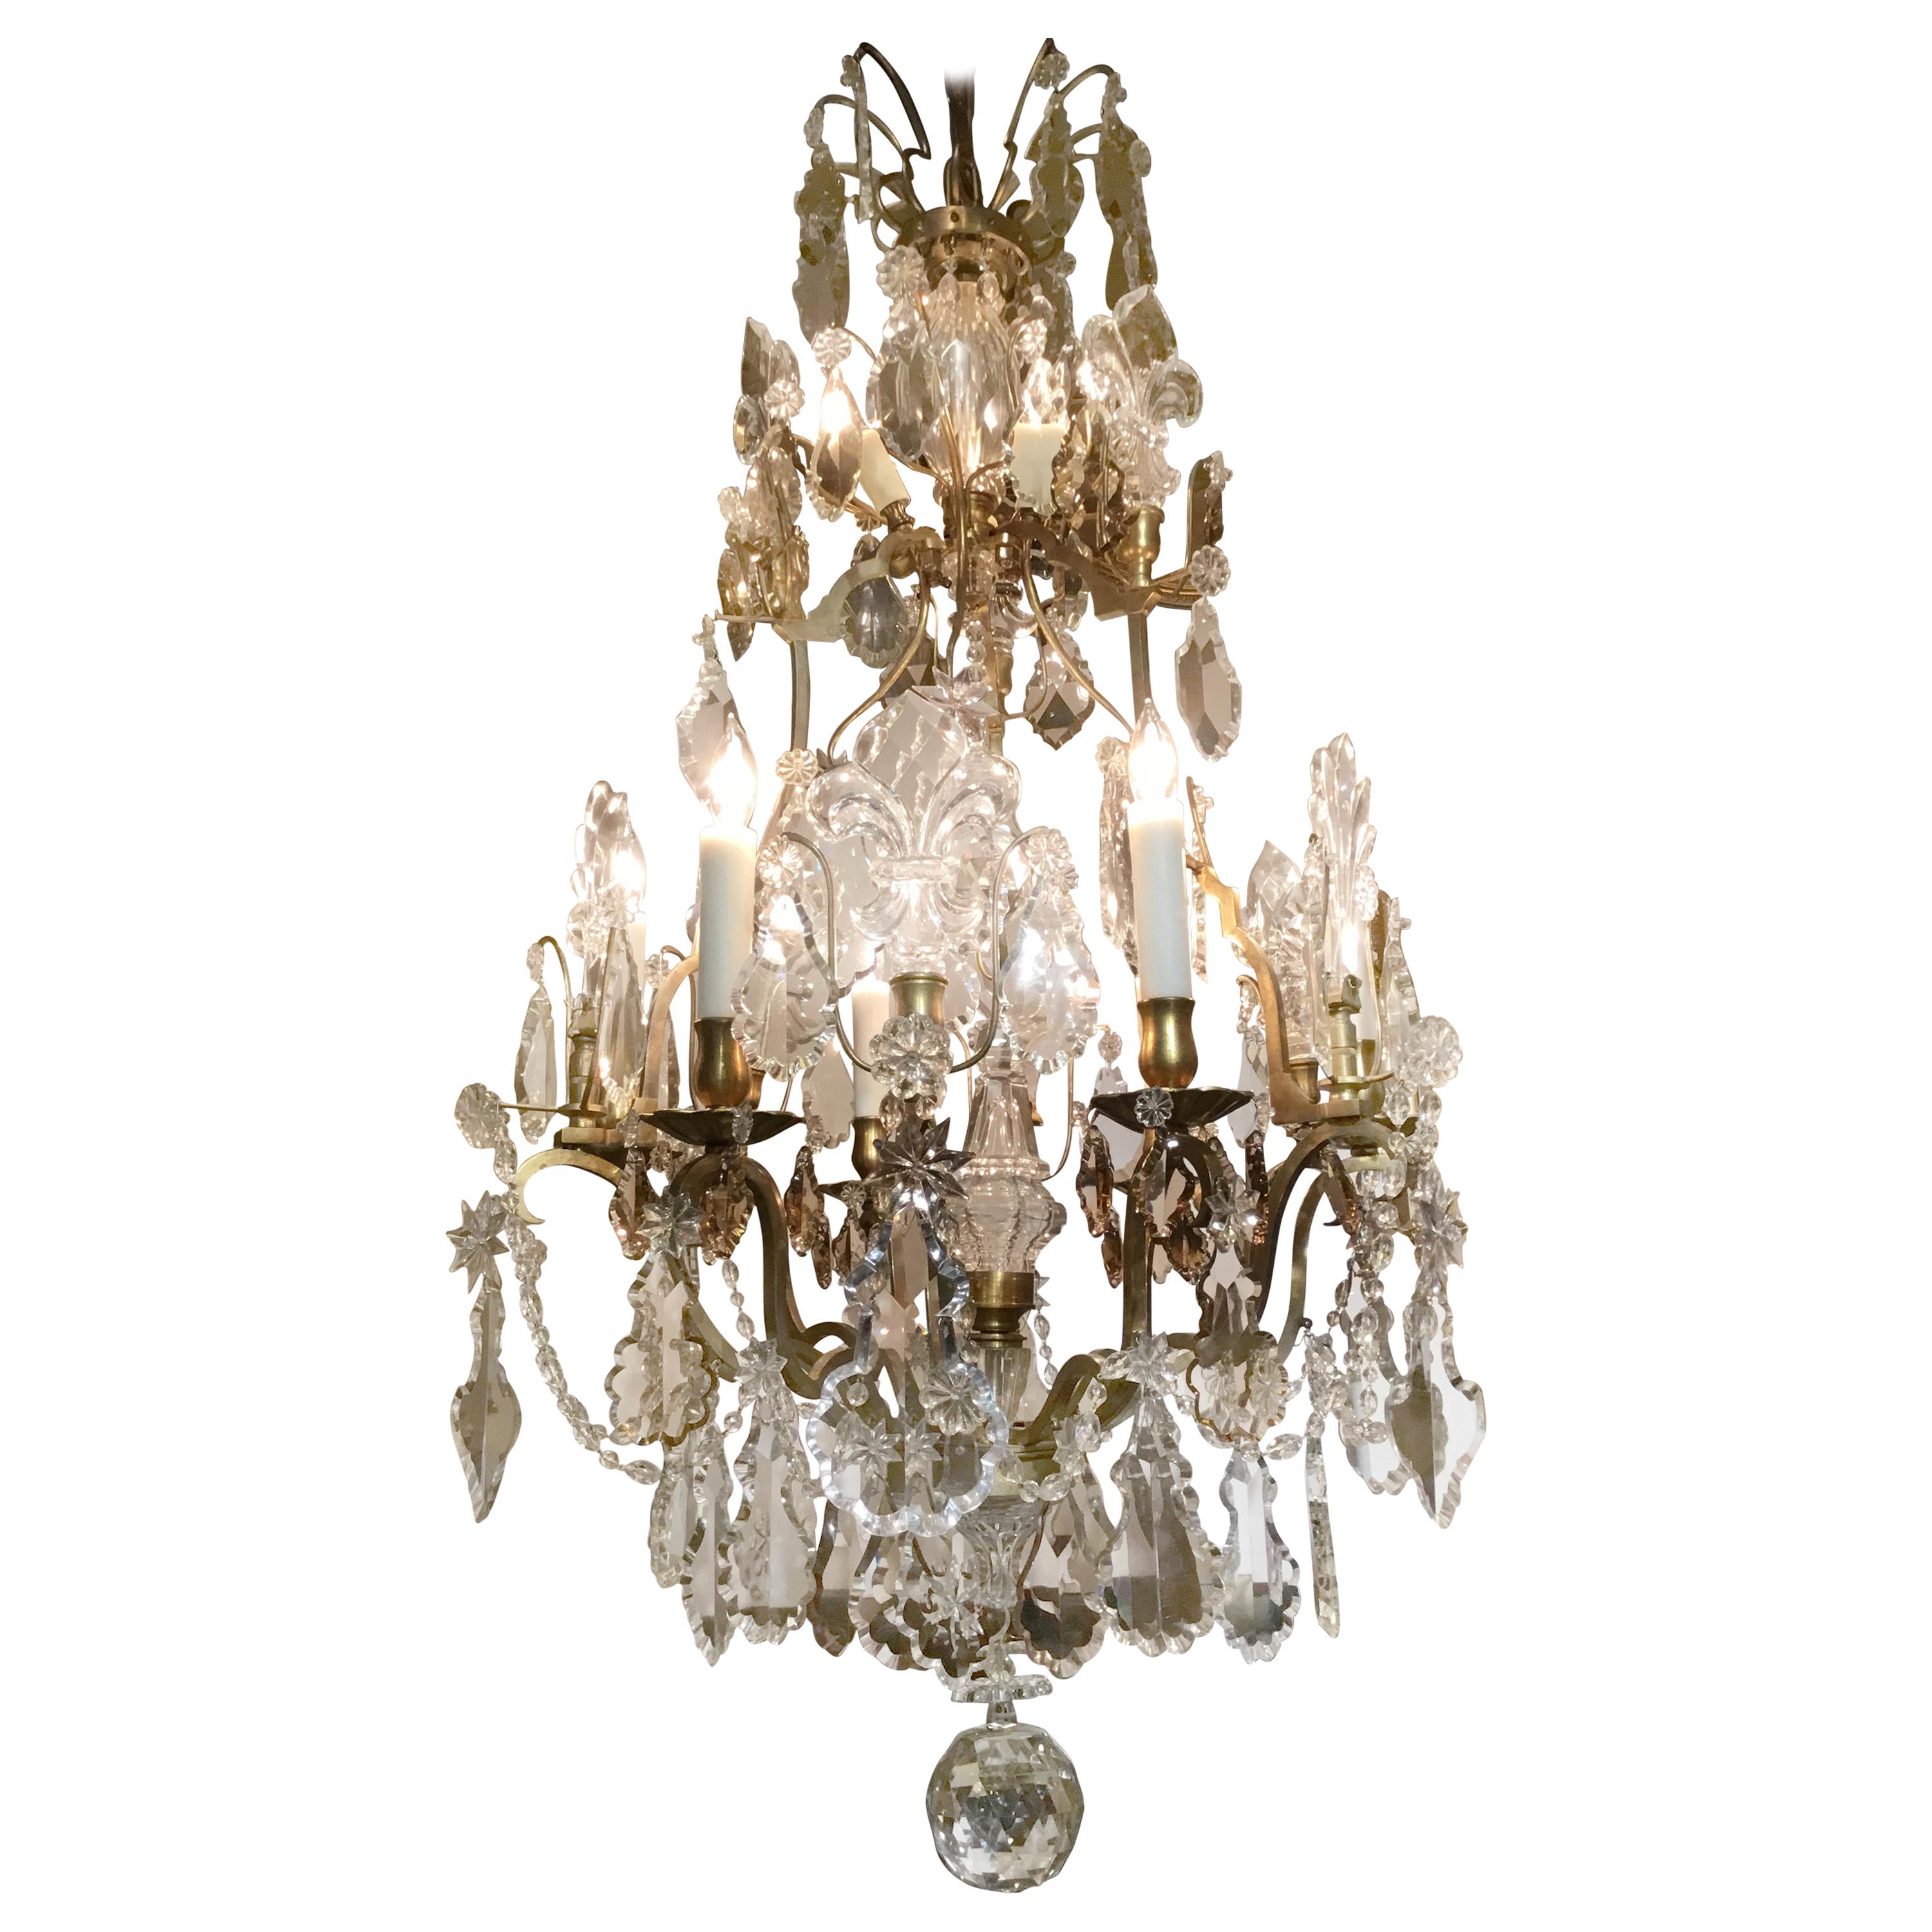 19th Century French Crystal and Gilt Bronze Chandelier with Nine Lights